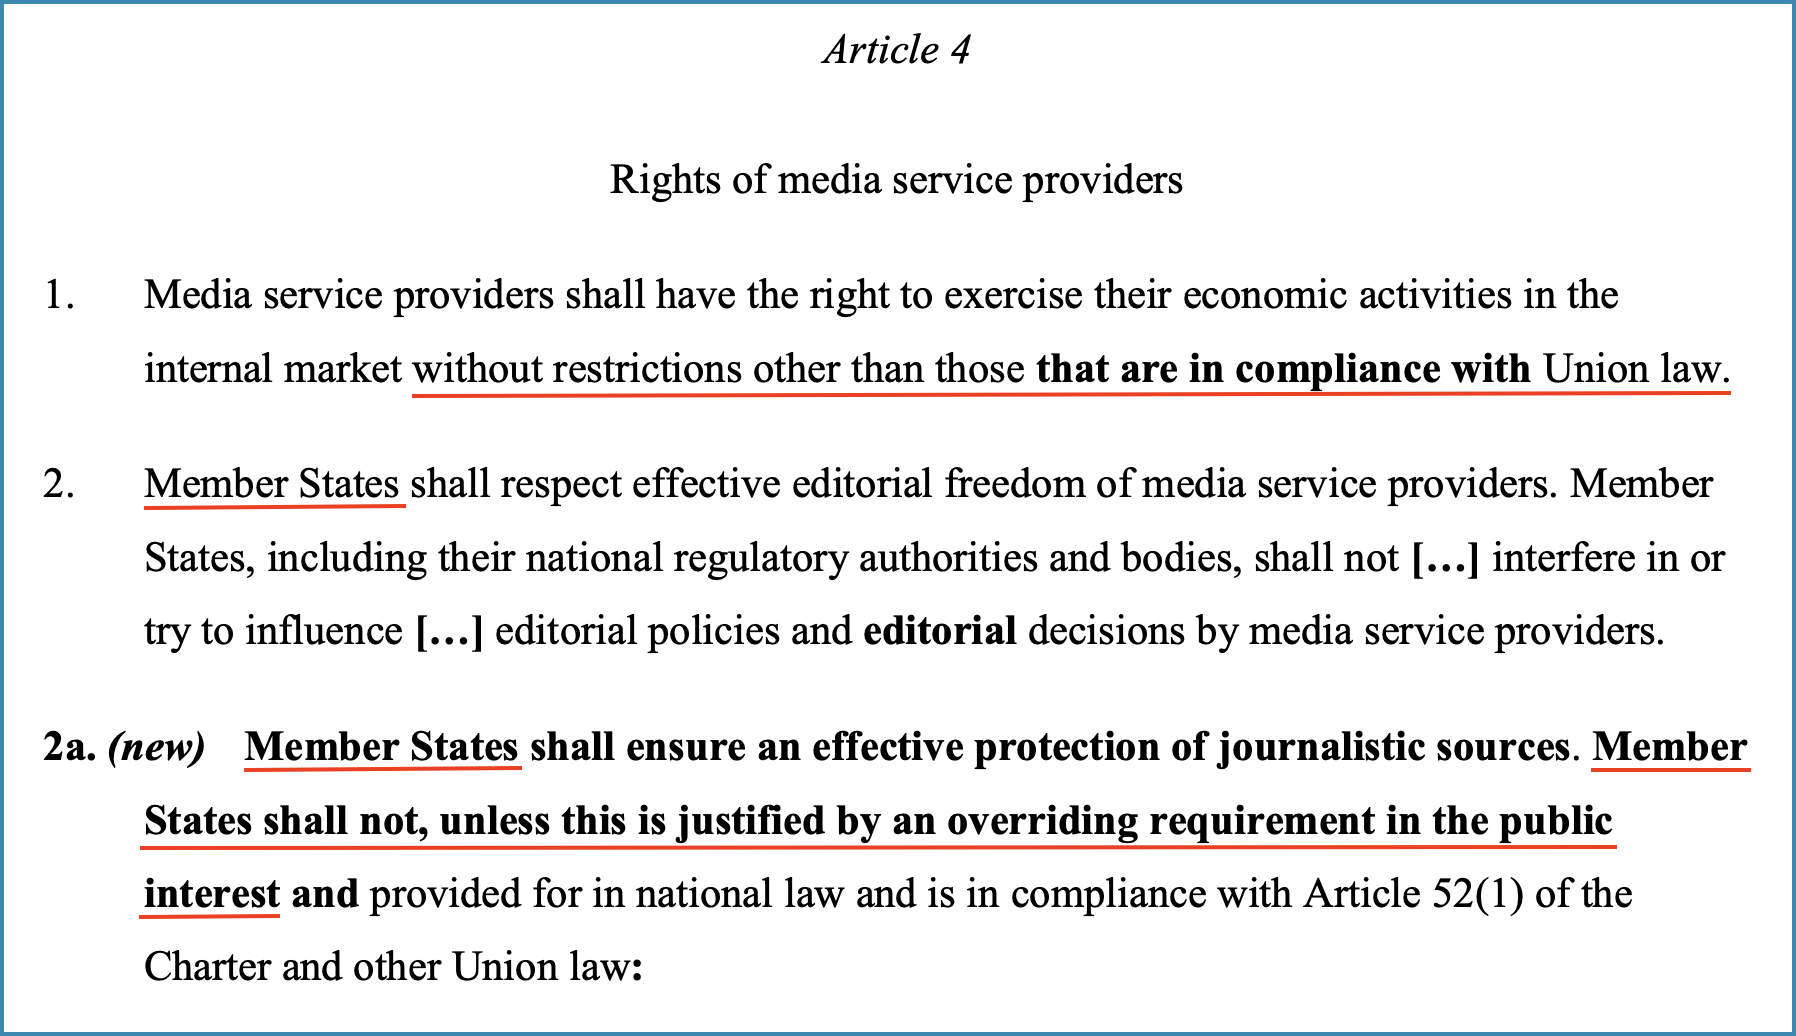 Article 4(1)(2) - Rights of media service providers